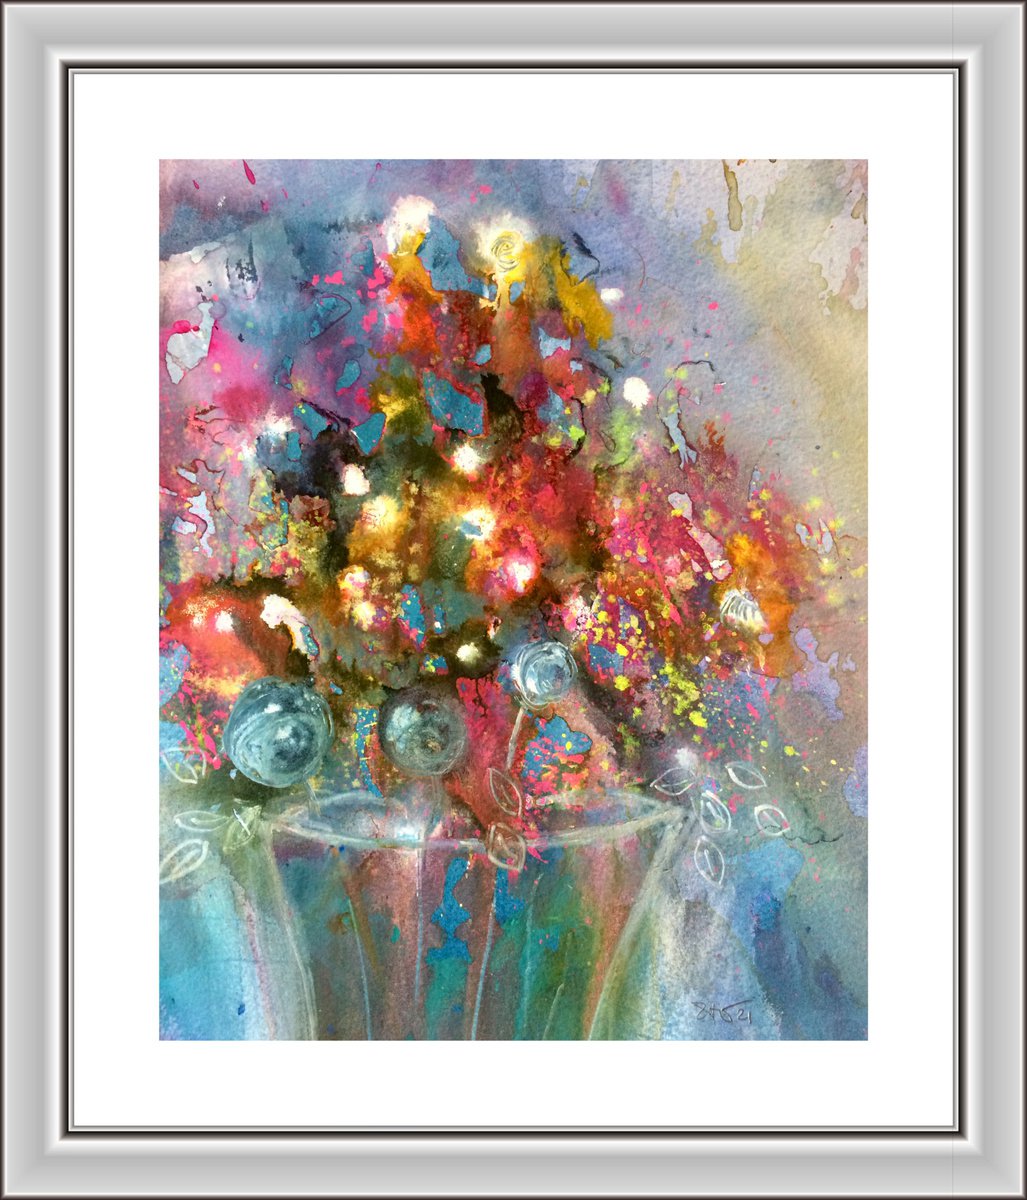 Send Yourself Some Flowers - Abstract Flowers Still-Life by Gesa Reuter